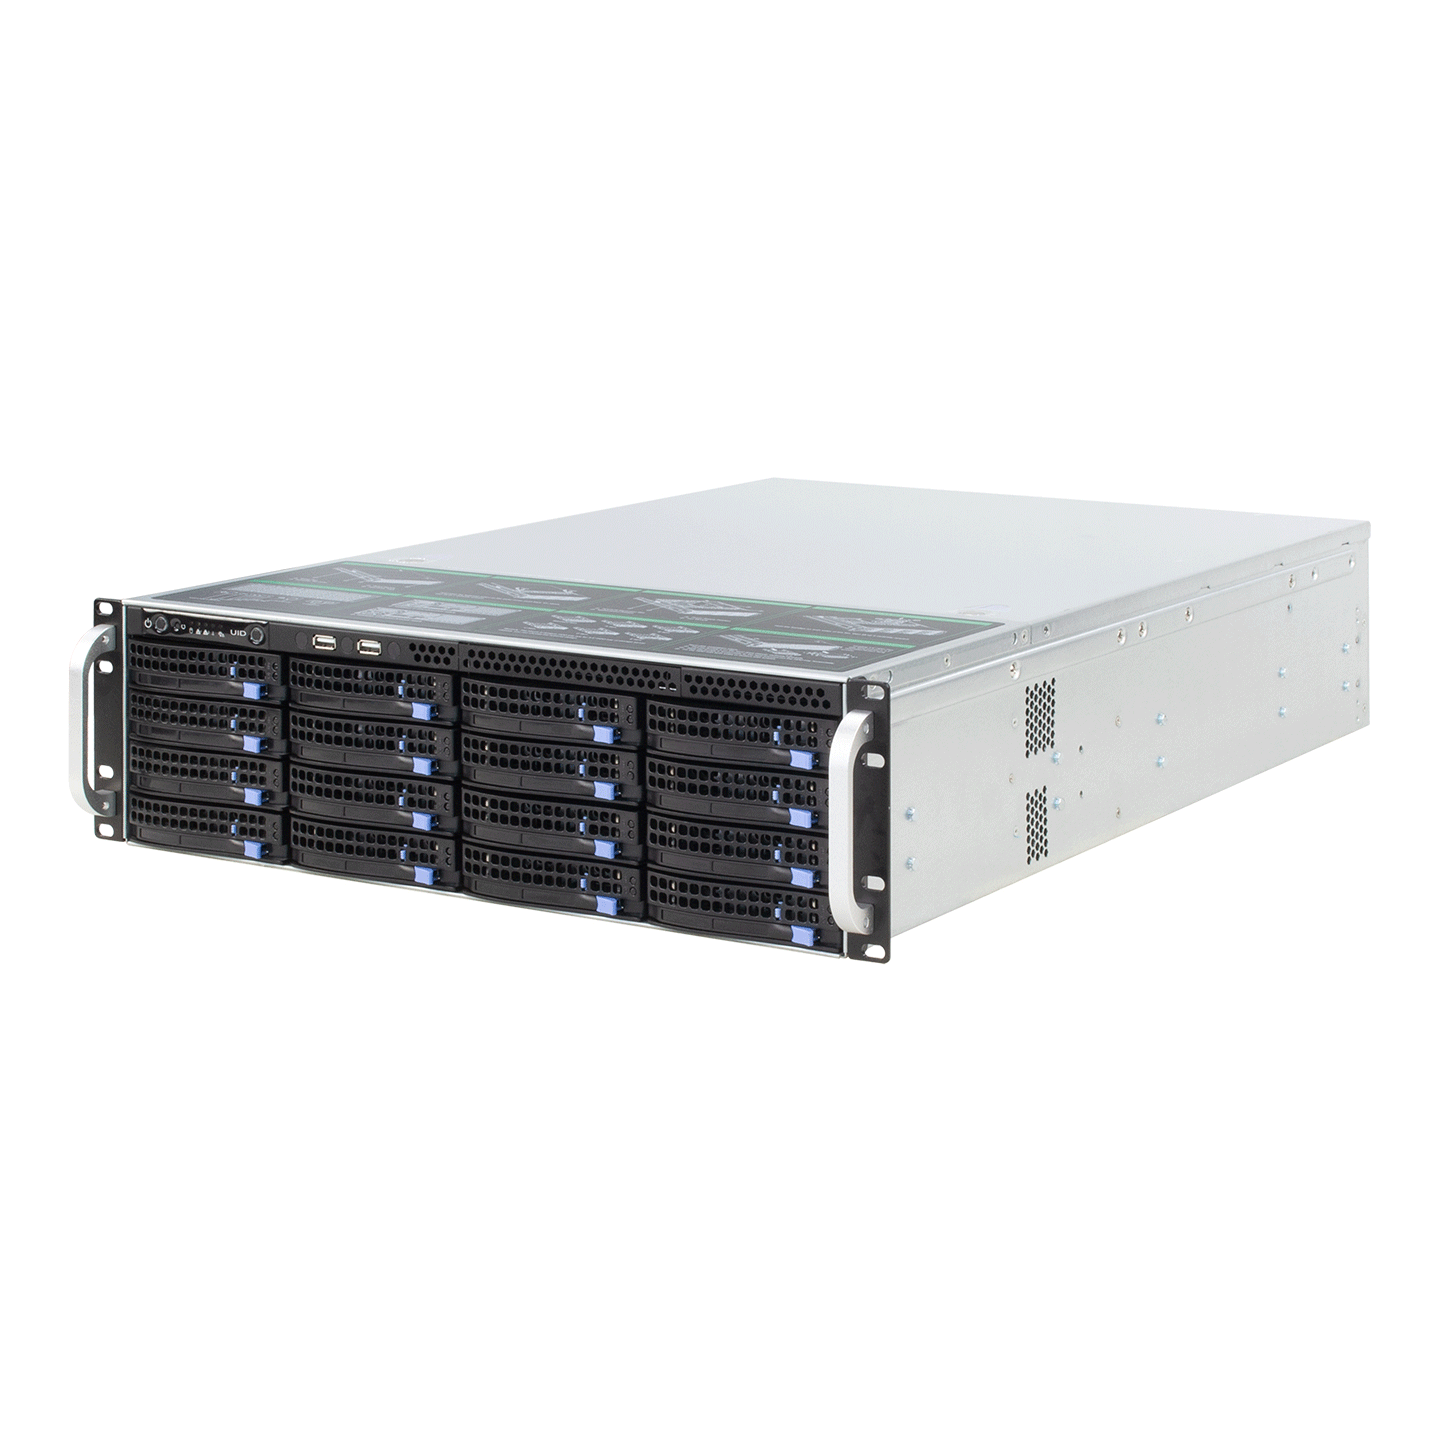 16~60 bay cctv storage and forwarding server-network video recorder, support 64~500 IPC access